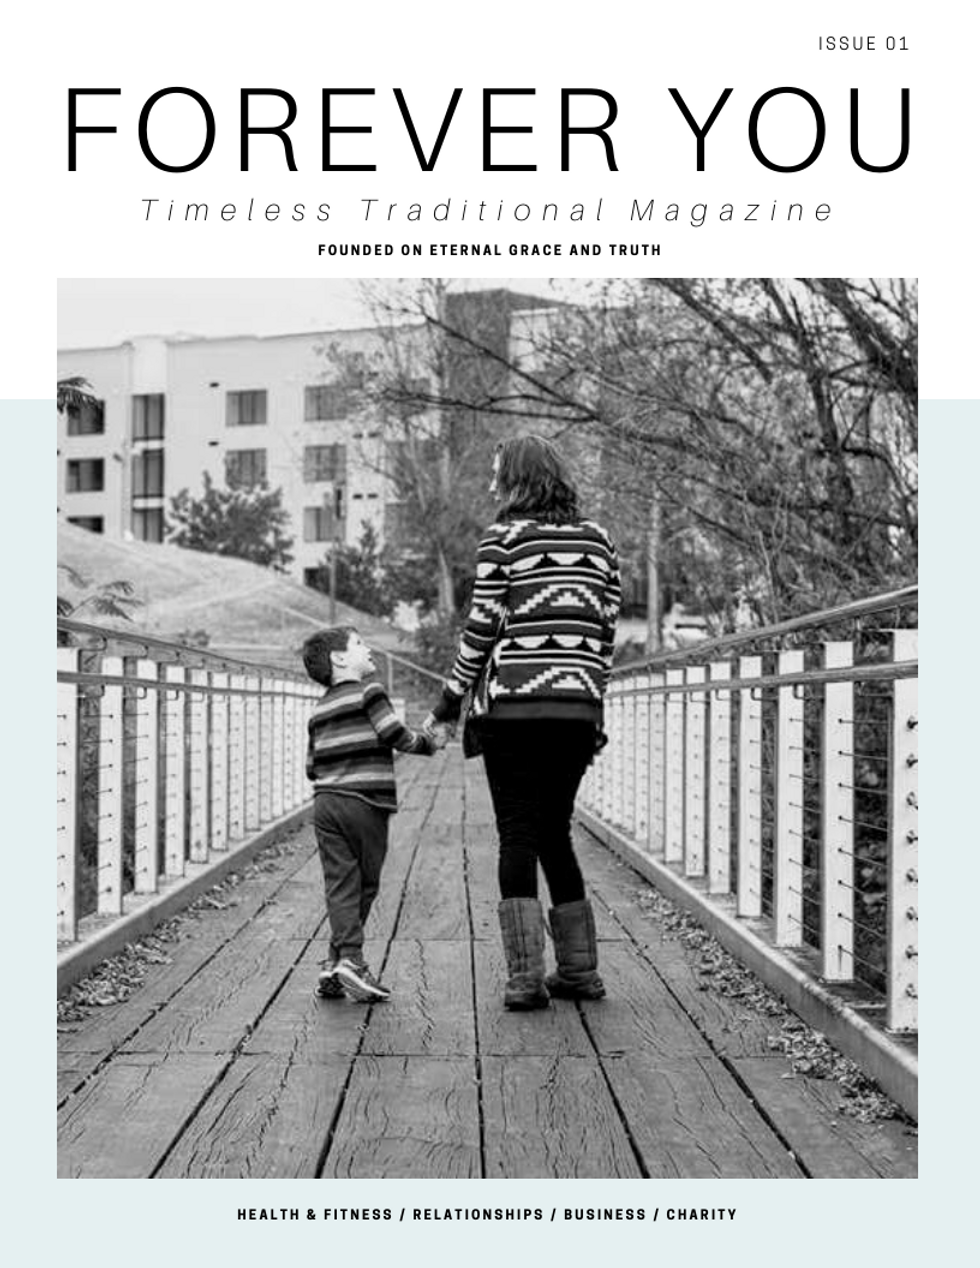 Welcome to Forever You Magazine